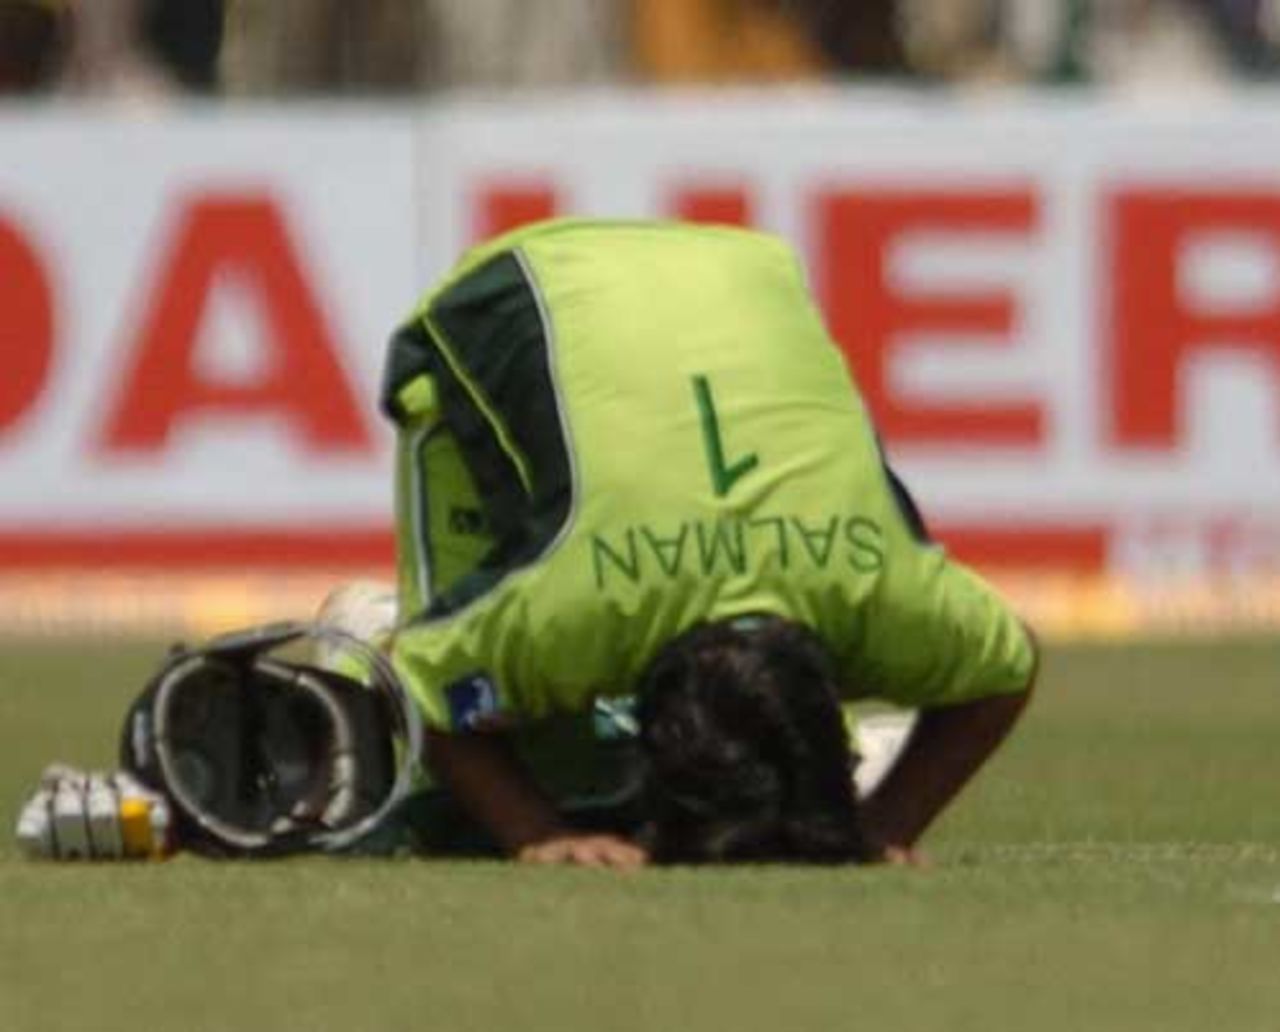 Salman Butt gives thanks after reaching a tremendous hundred against India, India v Pakistan, 3rd ODI, Jamshedpur, April 9, 2005